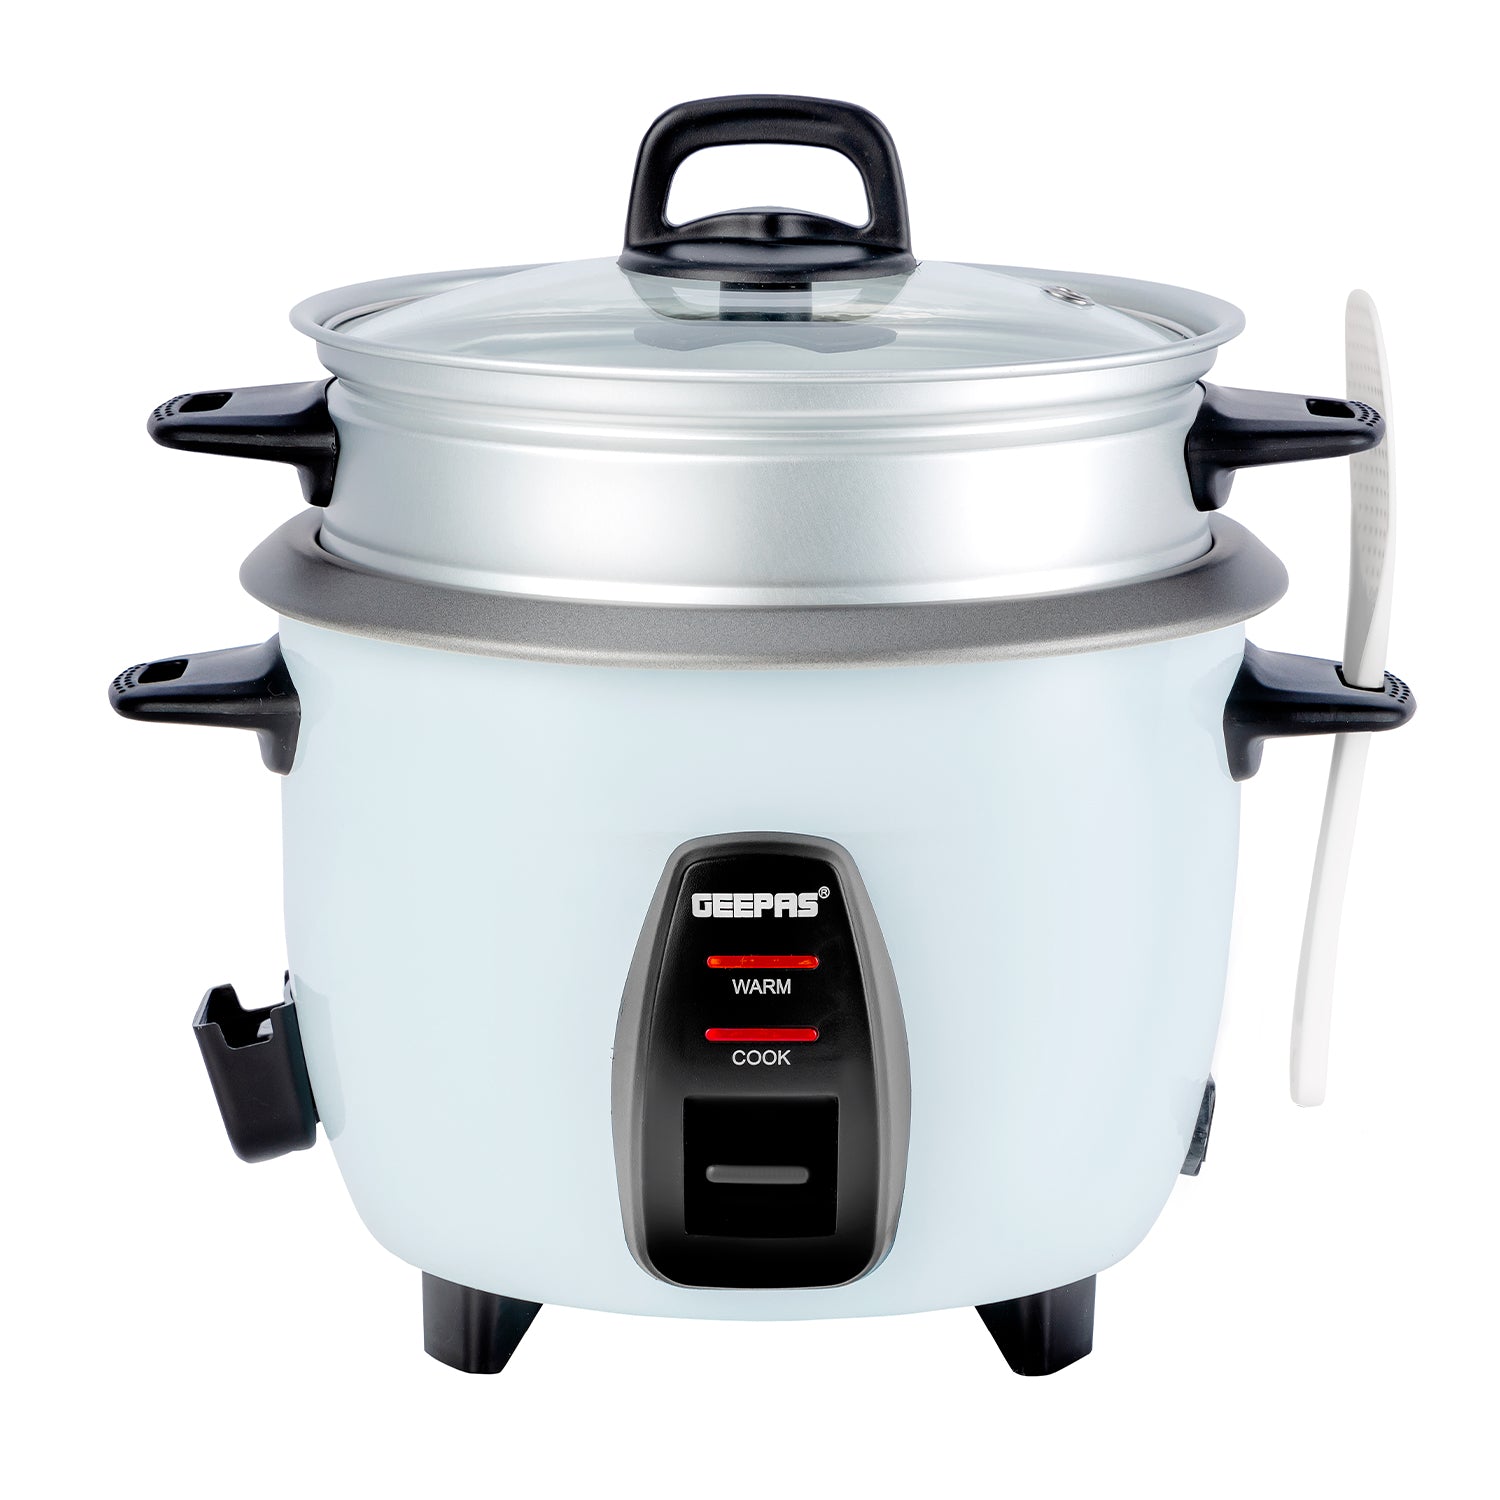 3-In-1 Instant Rice Cooker and Steamer 1L